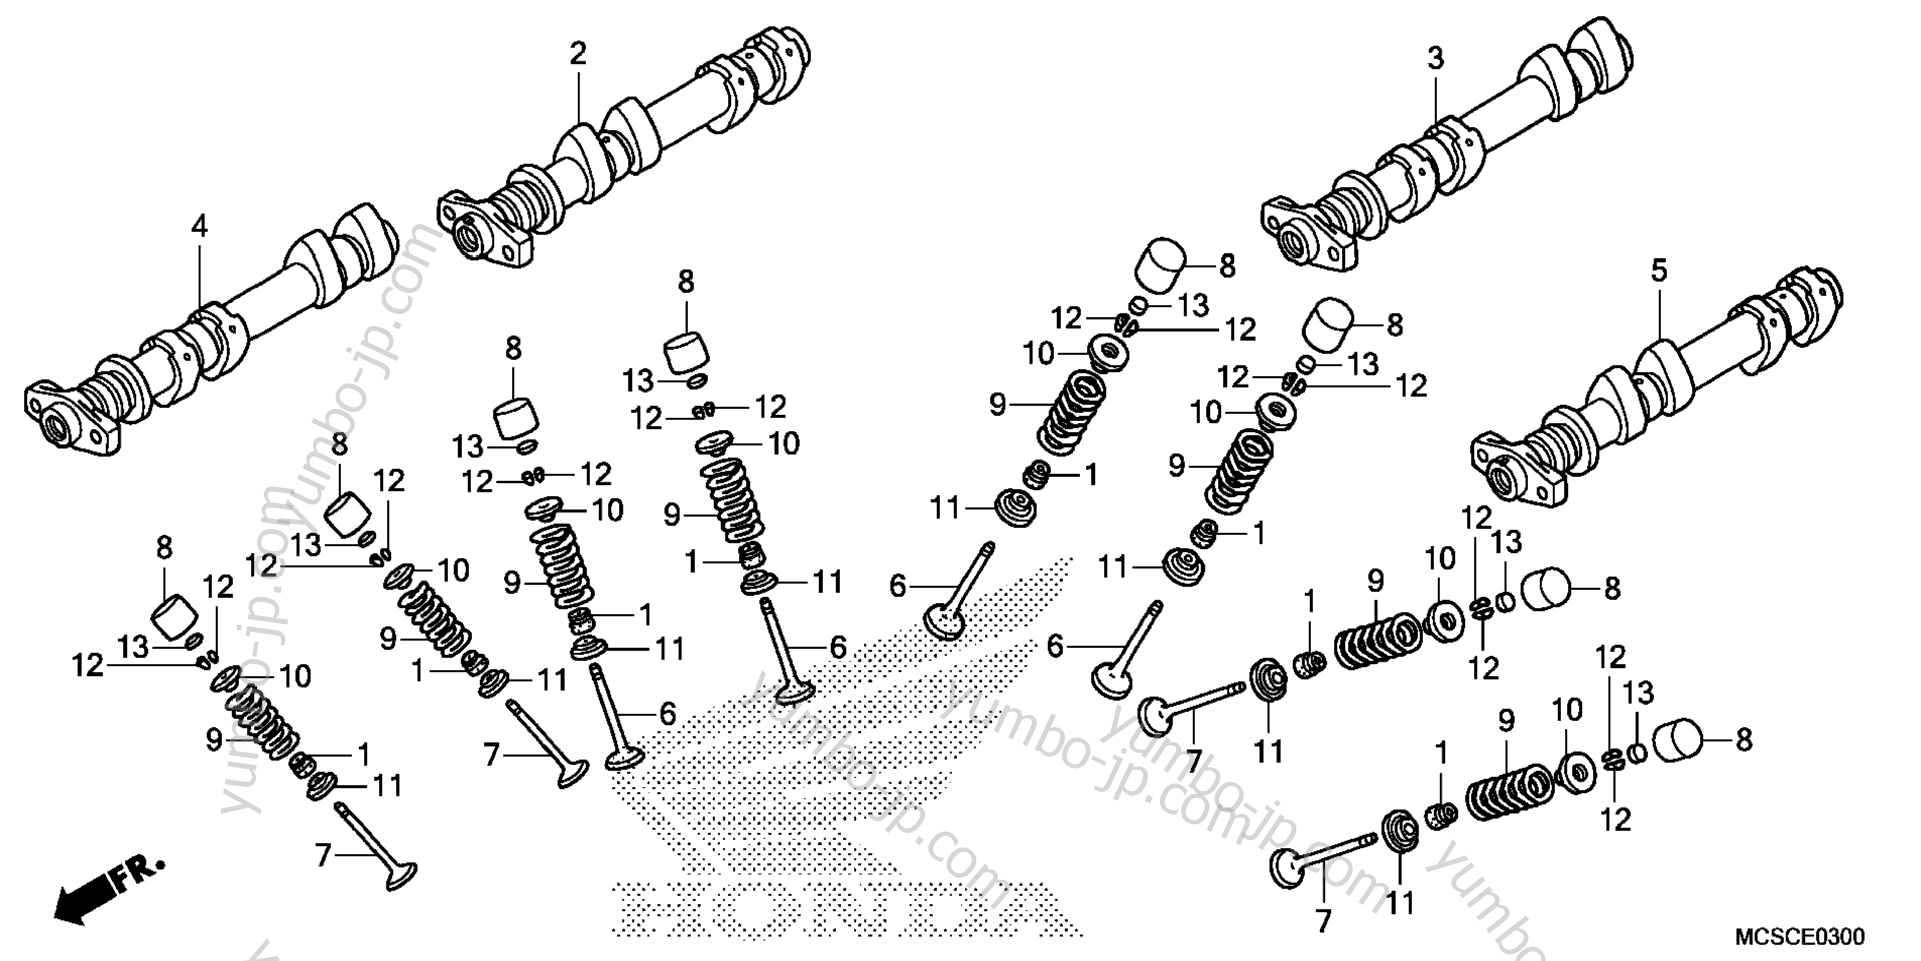 CAMSHAFT / VALVE for motorcycles HONDA ST1300A AC 2012 year